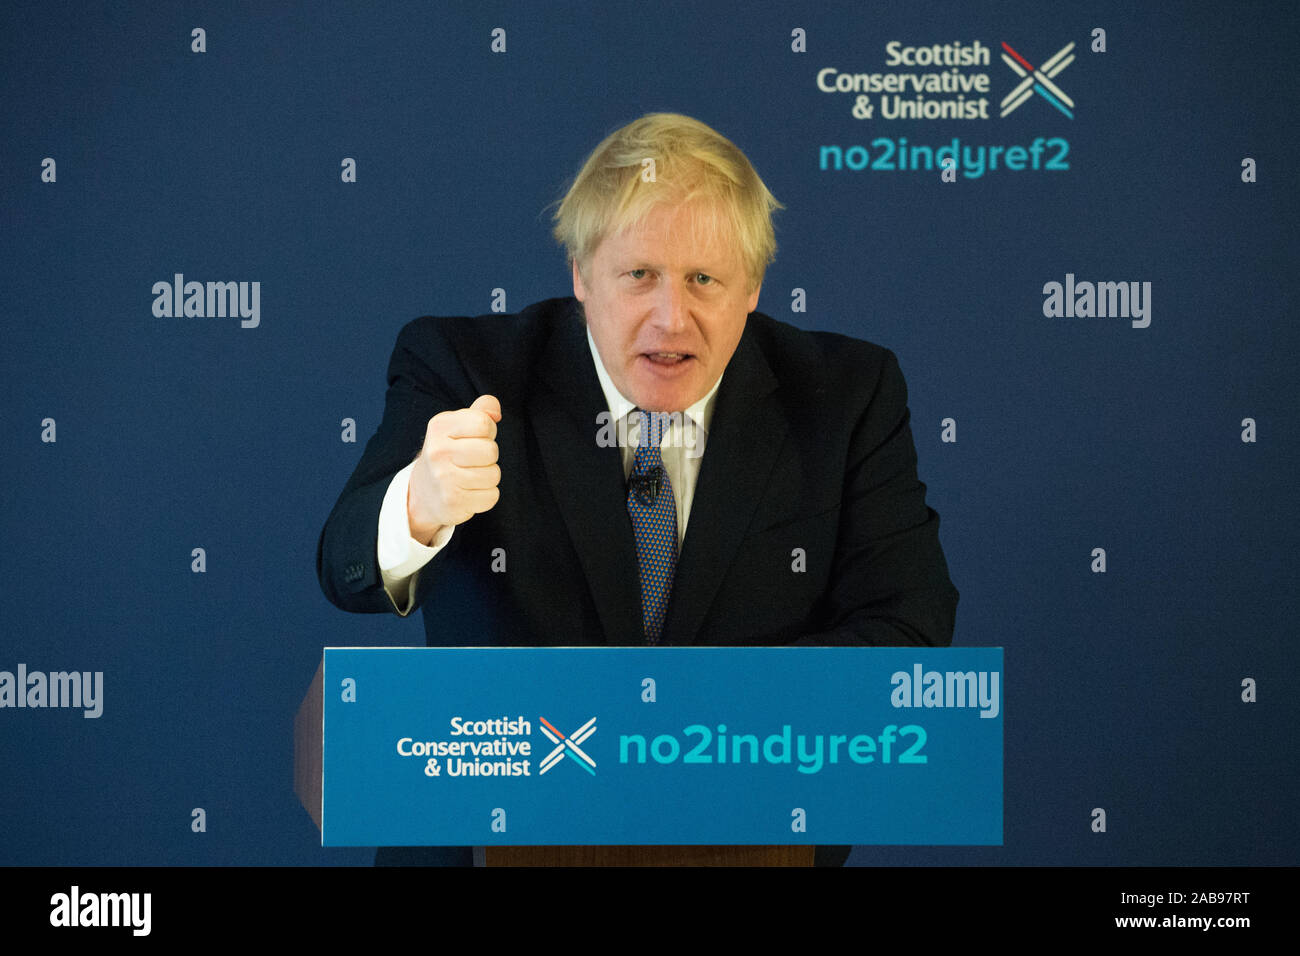 North Queensferry, UK. 26 November 2019. Pictured: Boris Johnson MP - UK Prime Minister and Leader of the Conservative and Unionist Party.   Conservative Party Manifesto Launch: Boris Johnson seen on his election campaign in North Queensferry. Credit: Colin Fisher/Alamy Live News. Credit: Colin Fisher/Alamy Live News Stock Photo